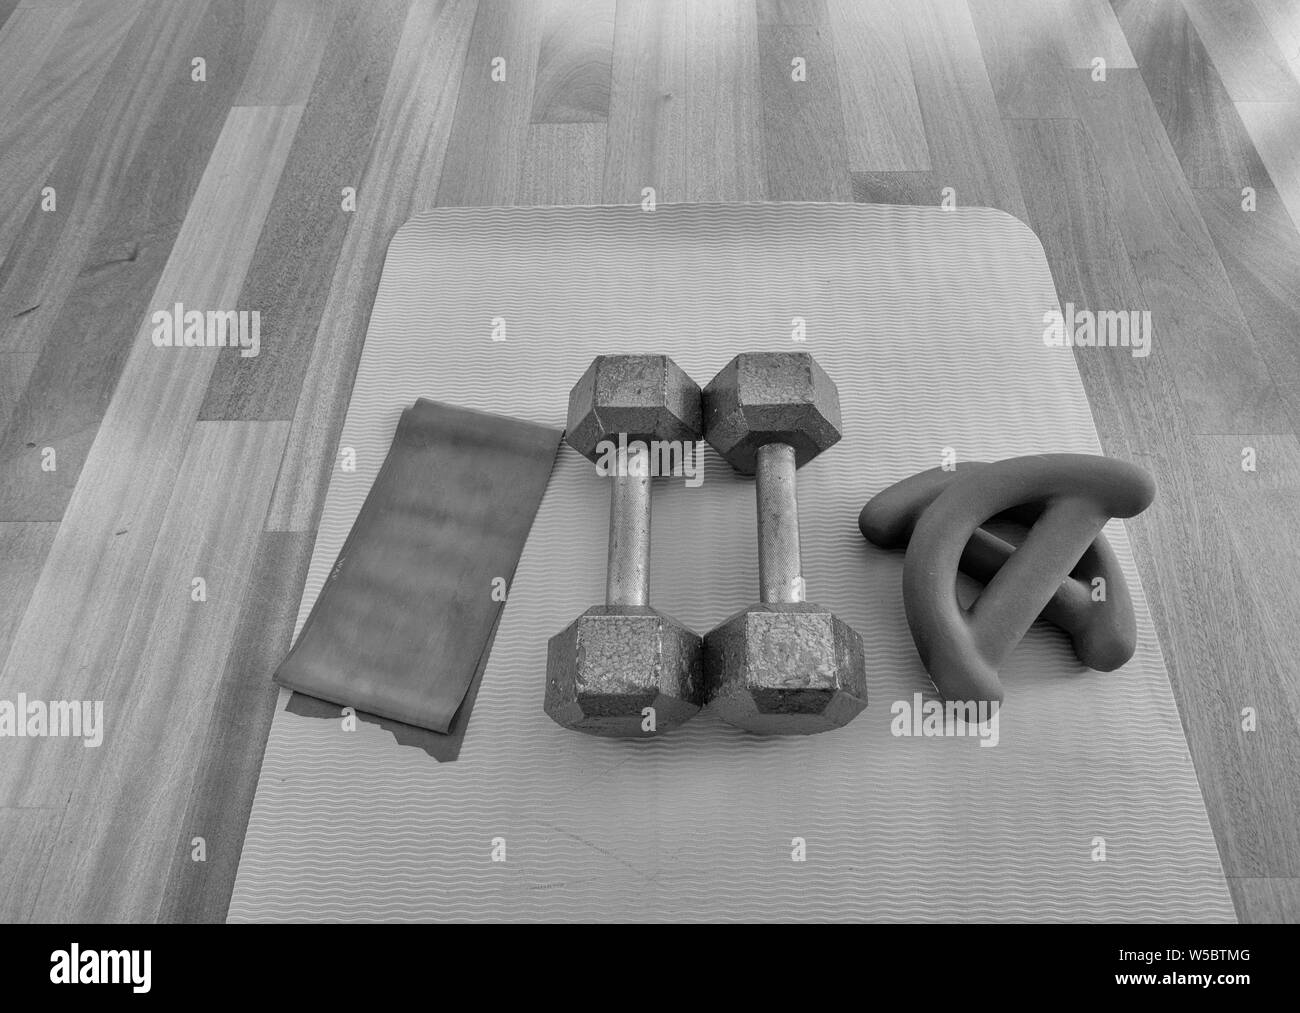 black and white version of Overhead view of a pair of dumbbells, theraband exercise bands, and a yoga mat on hardwood floor Stock Photo